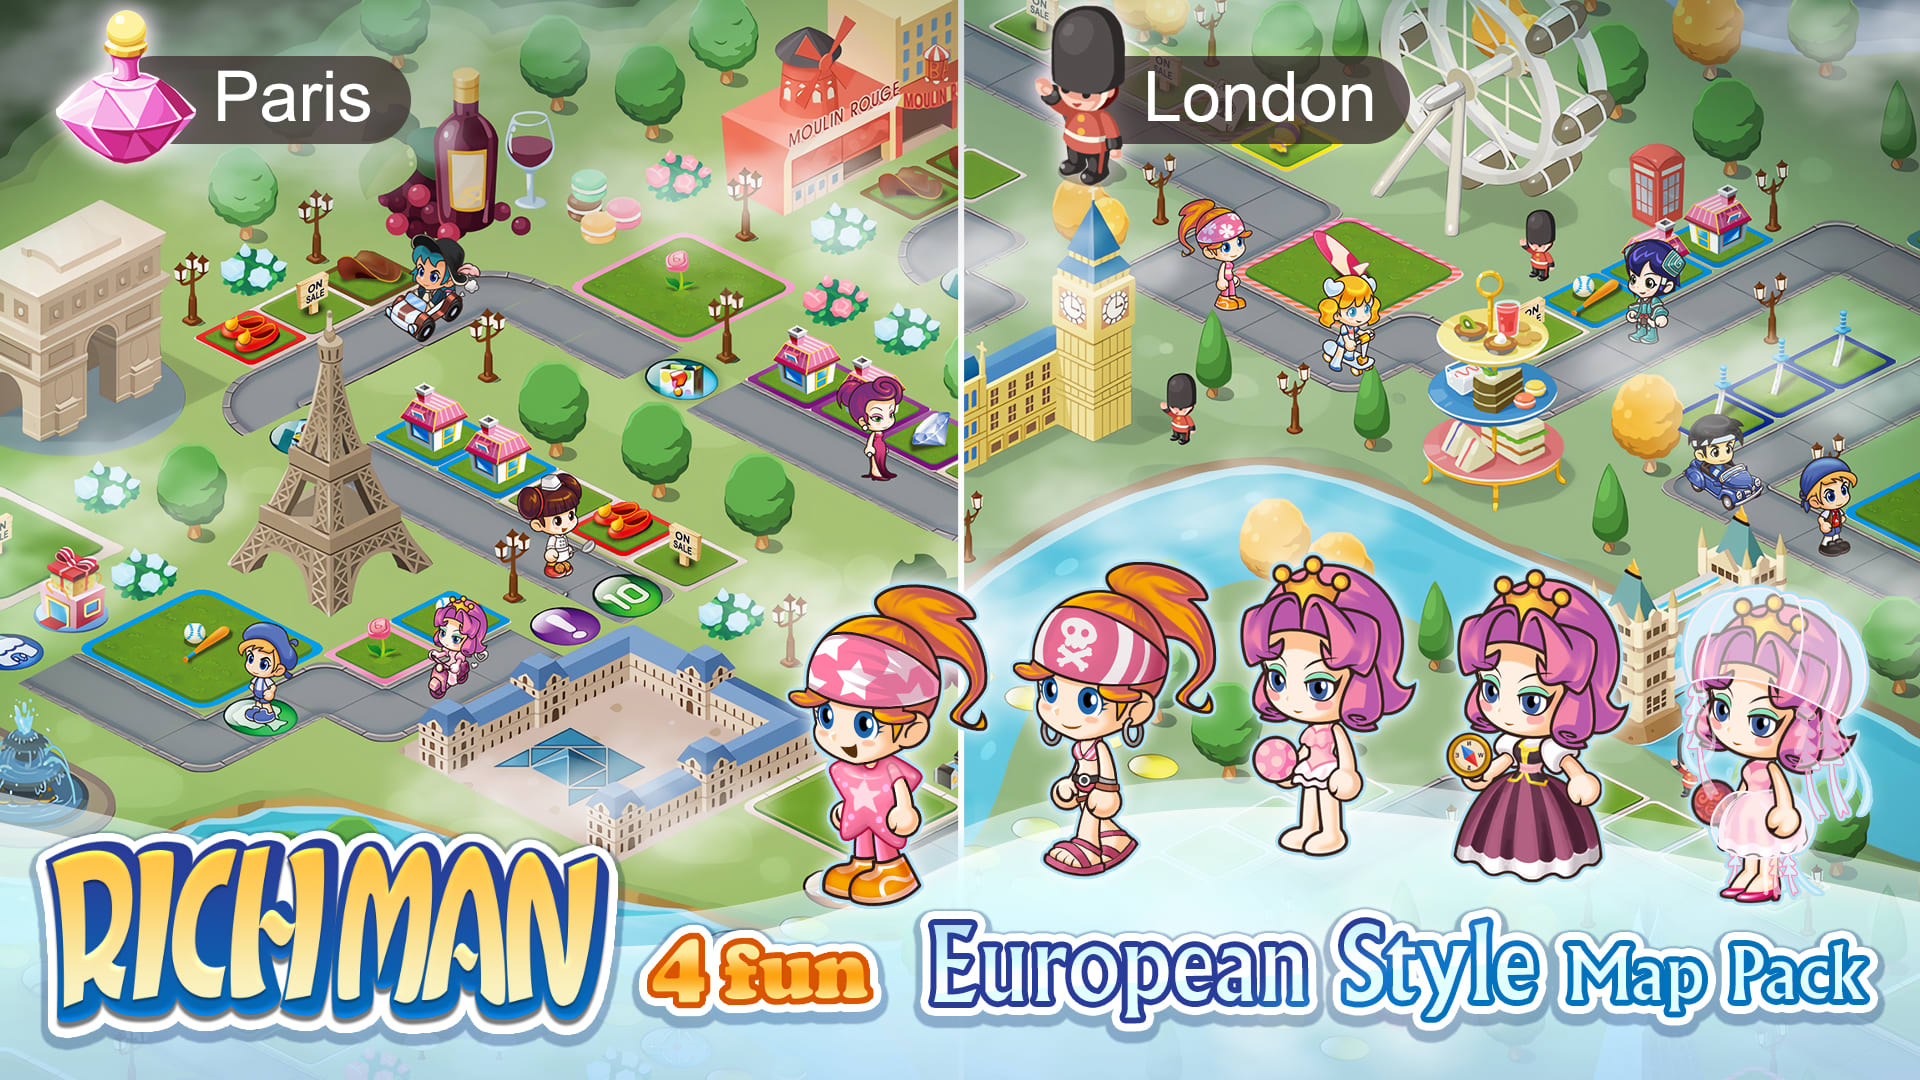 European Style Map Pack